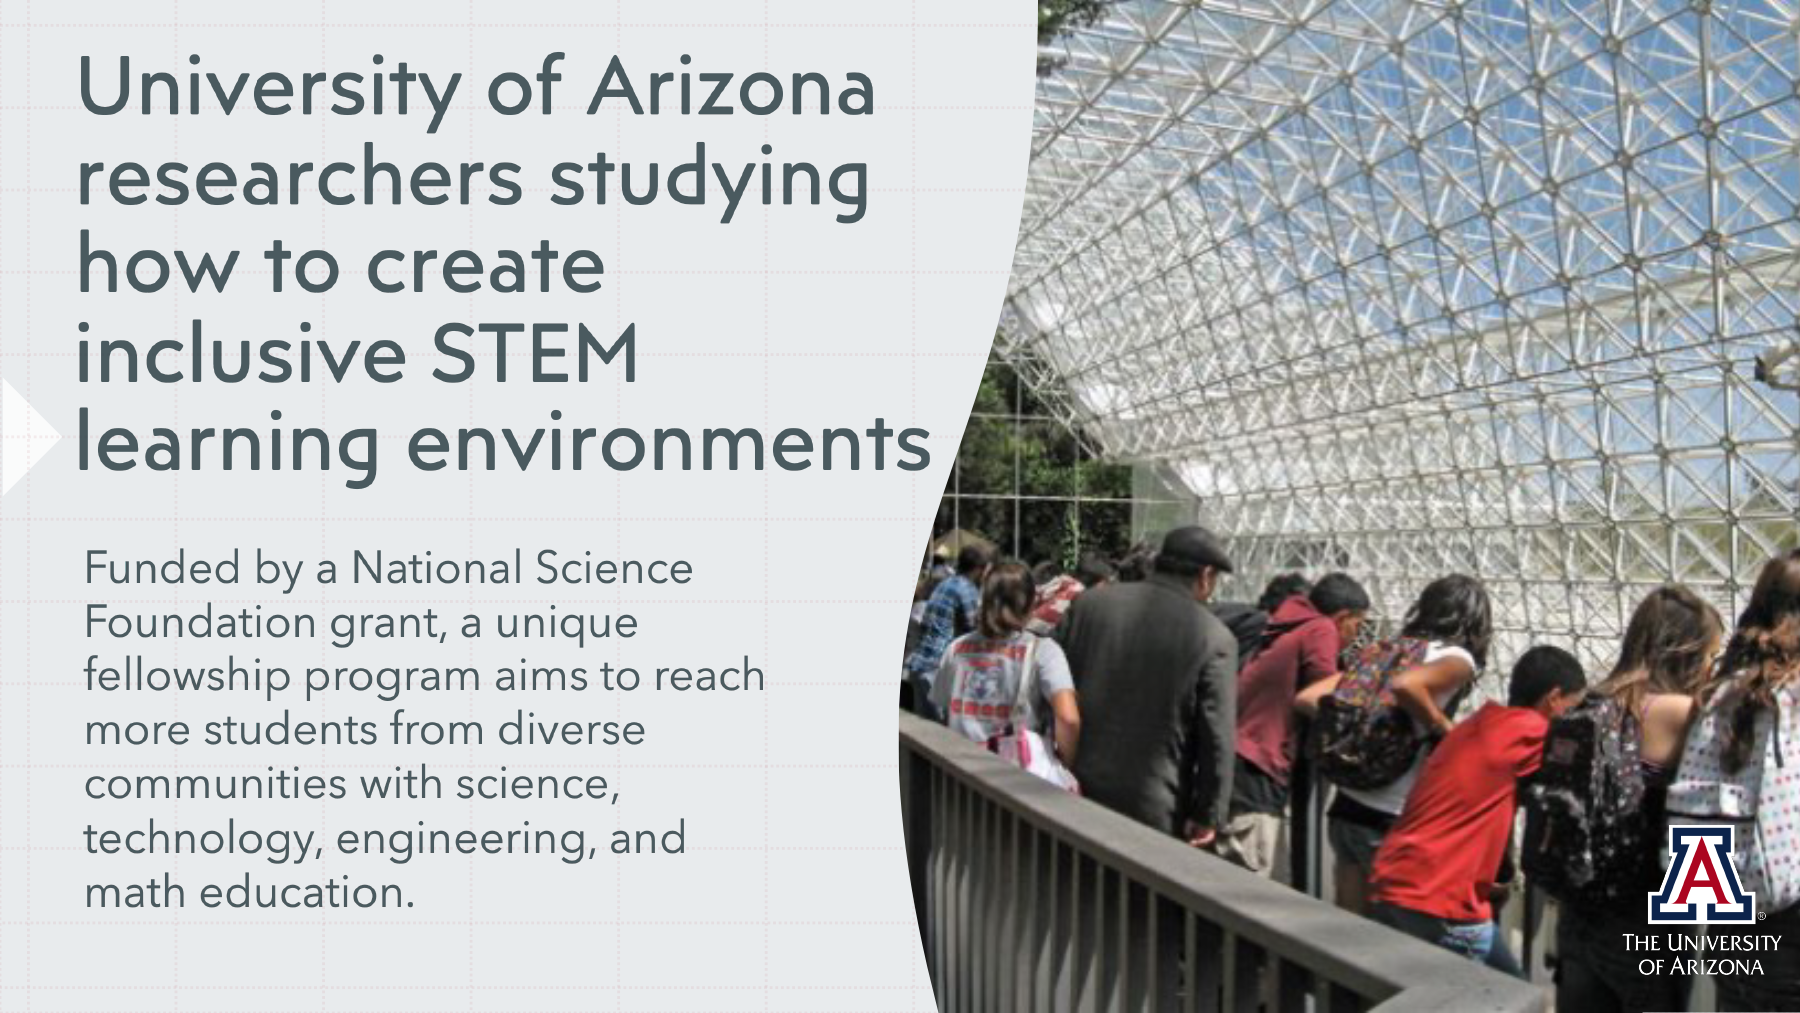 University of Arizona researchers studying how to create inclusive STEM learning environments